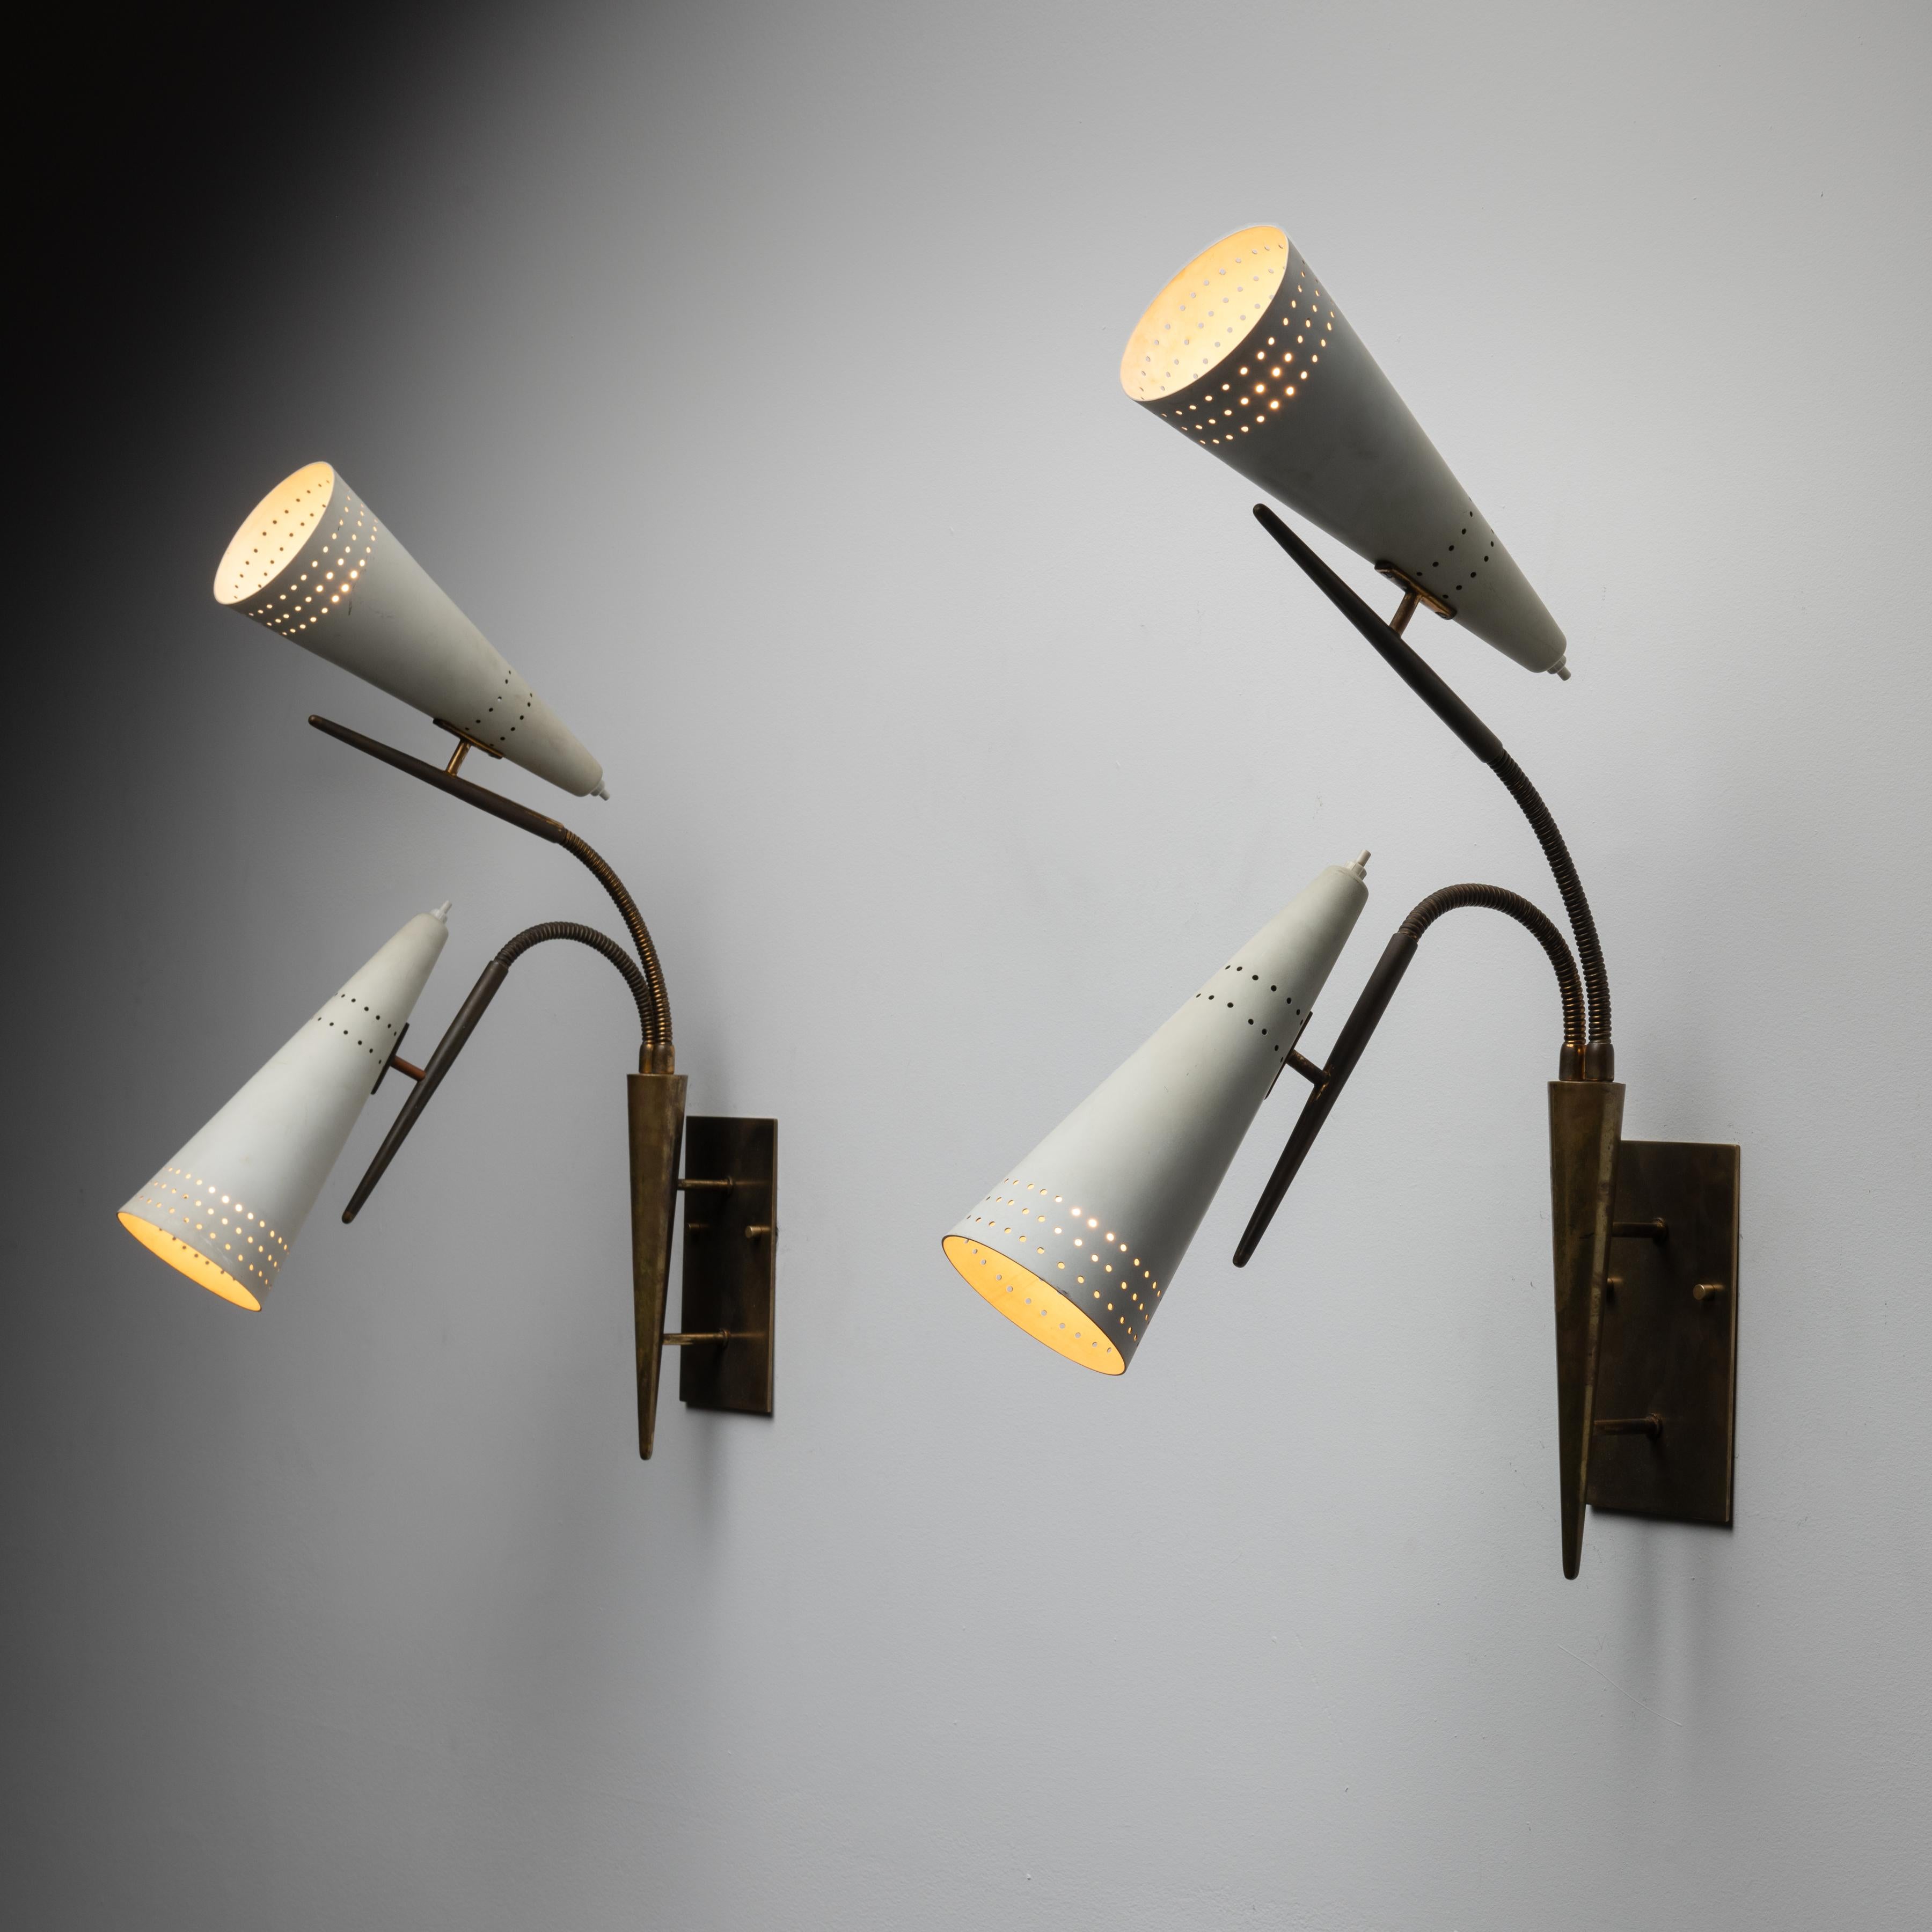 Pair of Sconces by Gilardi and Barzaghi. Designed and manufactured in Italy, circa the 1950s. Two off-white enameled perforated shades are paired onto flex brass arms, allowing the user to chose different positions. Each shade has individually push